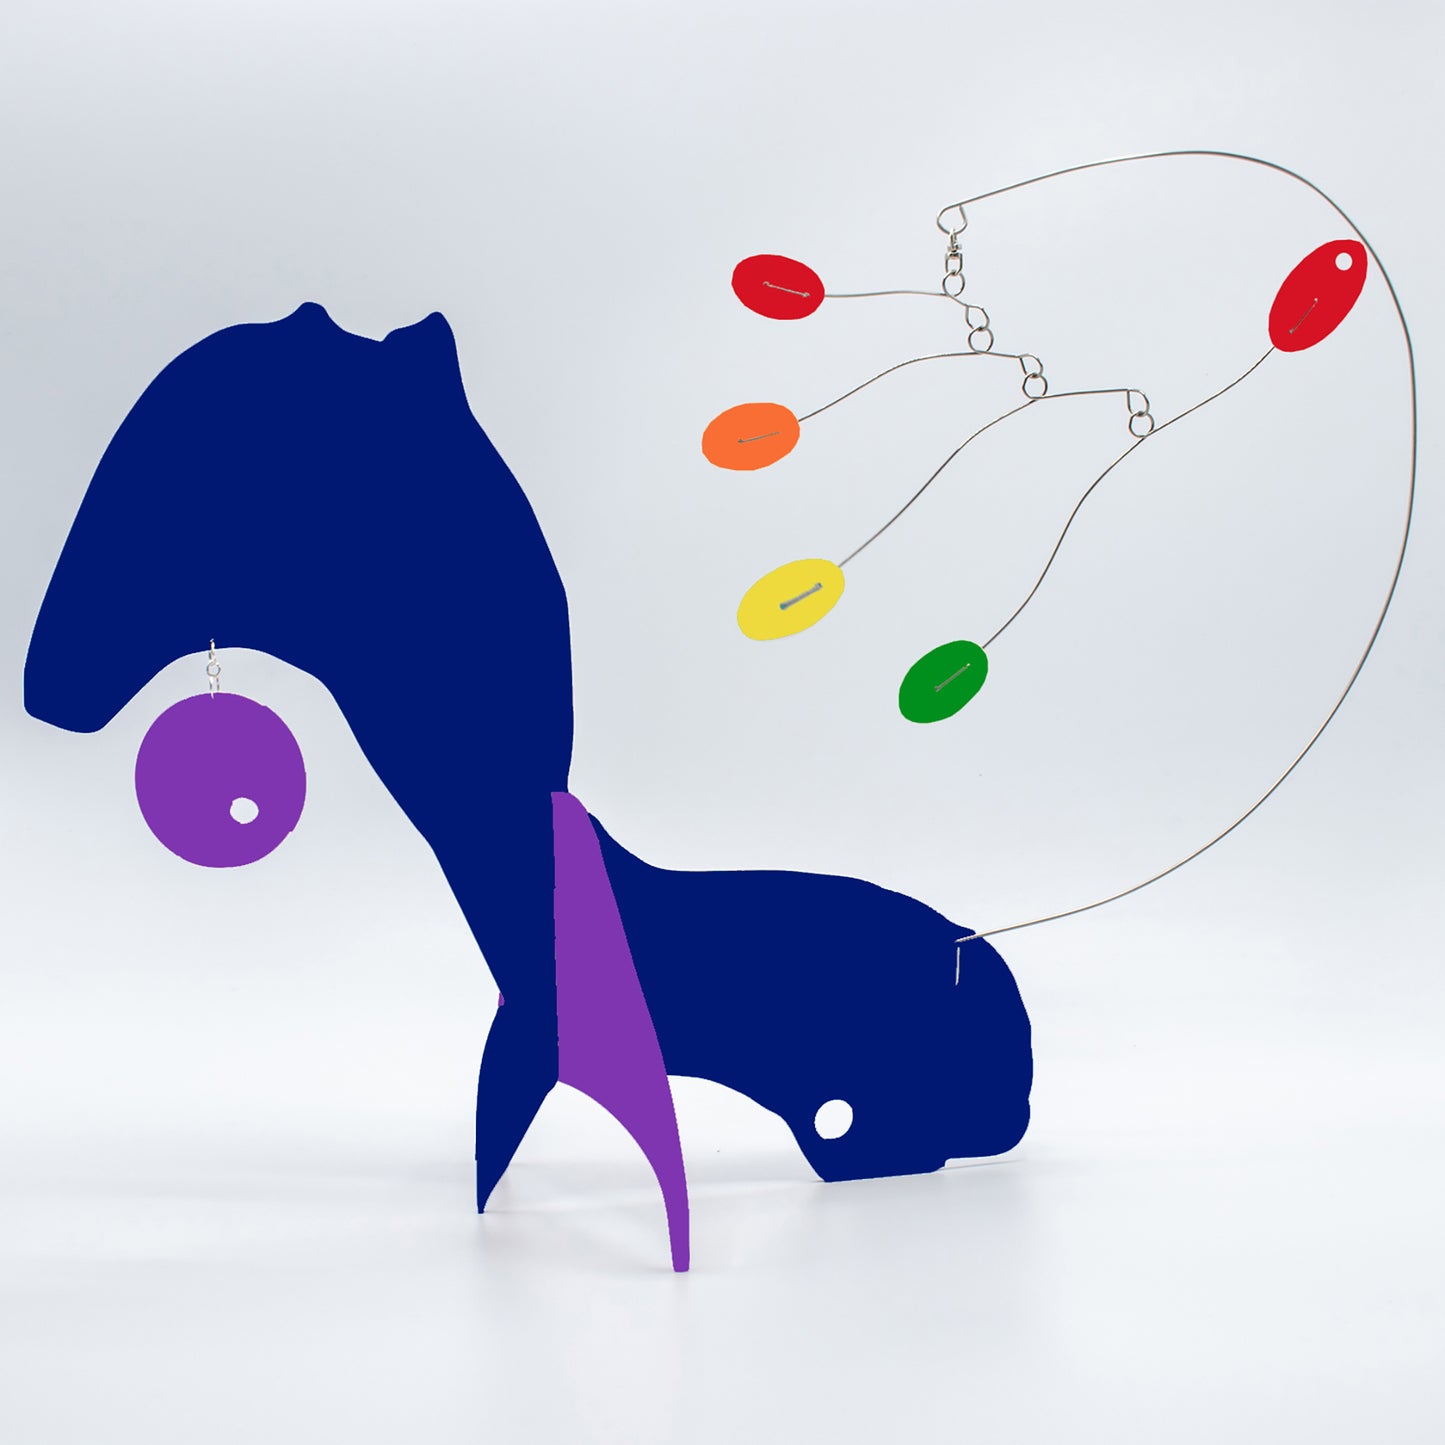 KinetiCats Collection Fox in Navy Blue, Purple, Red, Orange, Yellow and Green - one of 12 Modern Cute Abstract Animal Art Sculpture Kinetic Stabiles inspired by Dada and mid century modern style art by AtomicMobiles.com